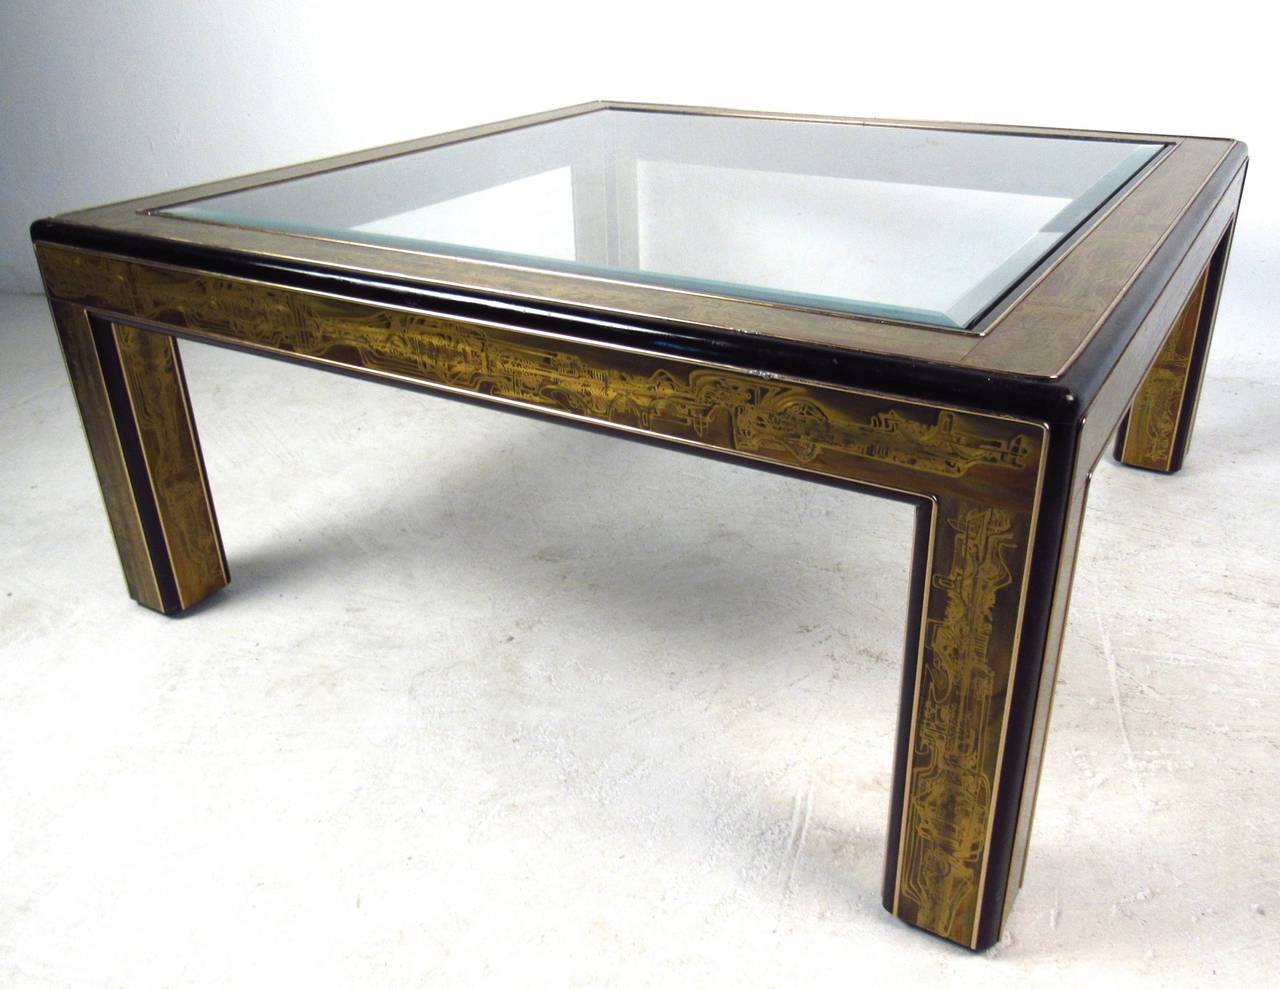 This 1960s acid-etched coffee table still has the original Mastercraft label and features unique intricately designed base, bevelled glass top, and makes a unique and eye-catching addition to any interior. Please confirm item location (NY or NJ).